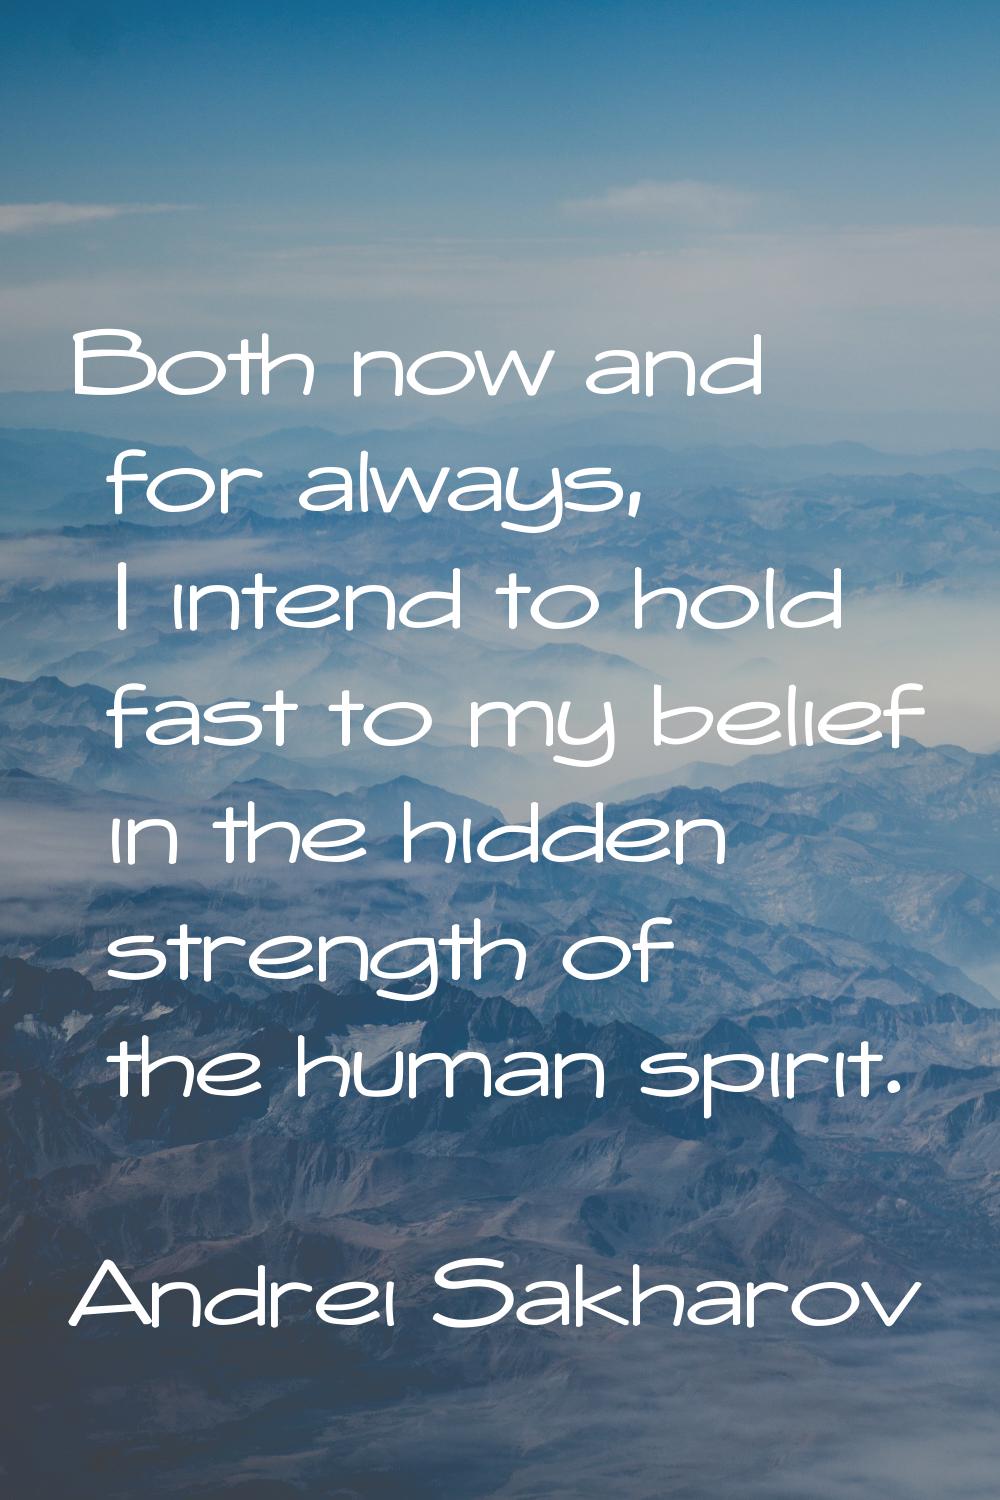 Both now and for always, I intend to hold fast to my belief in the hidden strength of the human spi